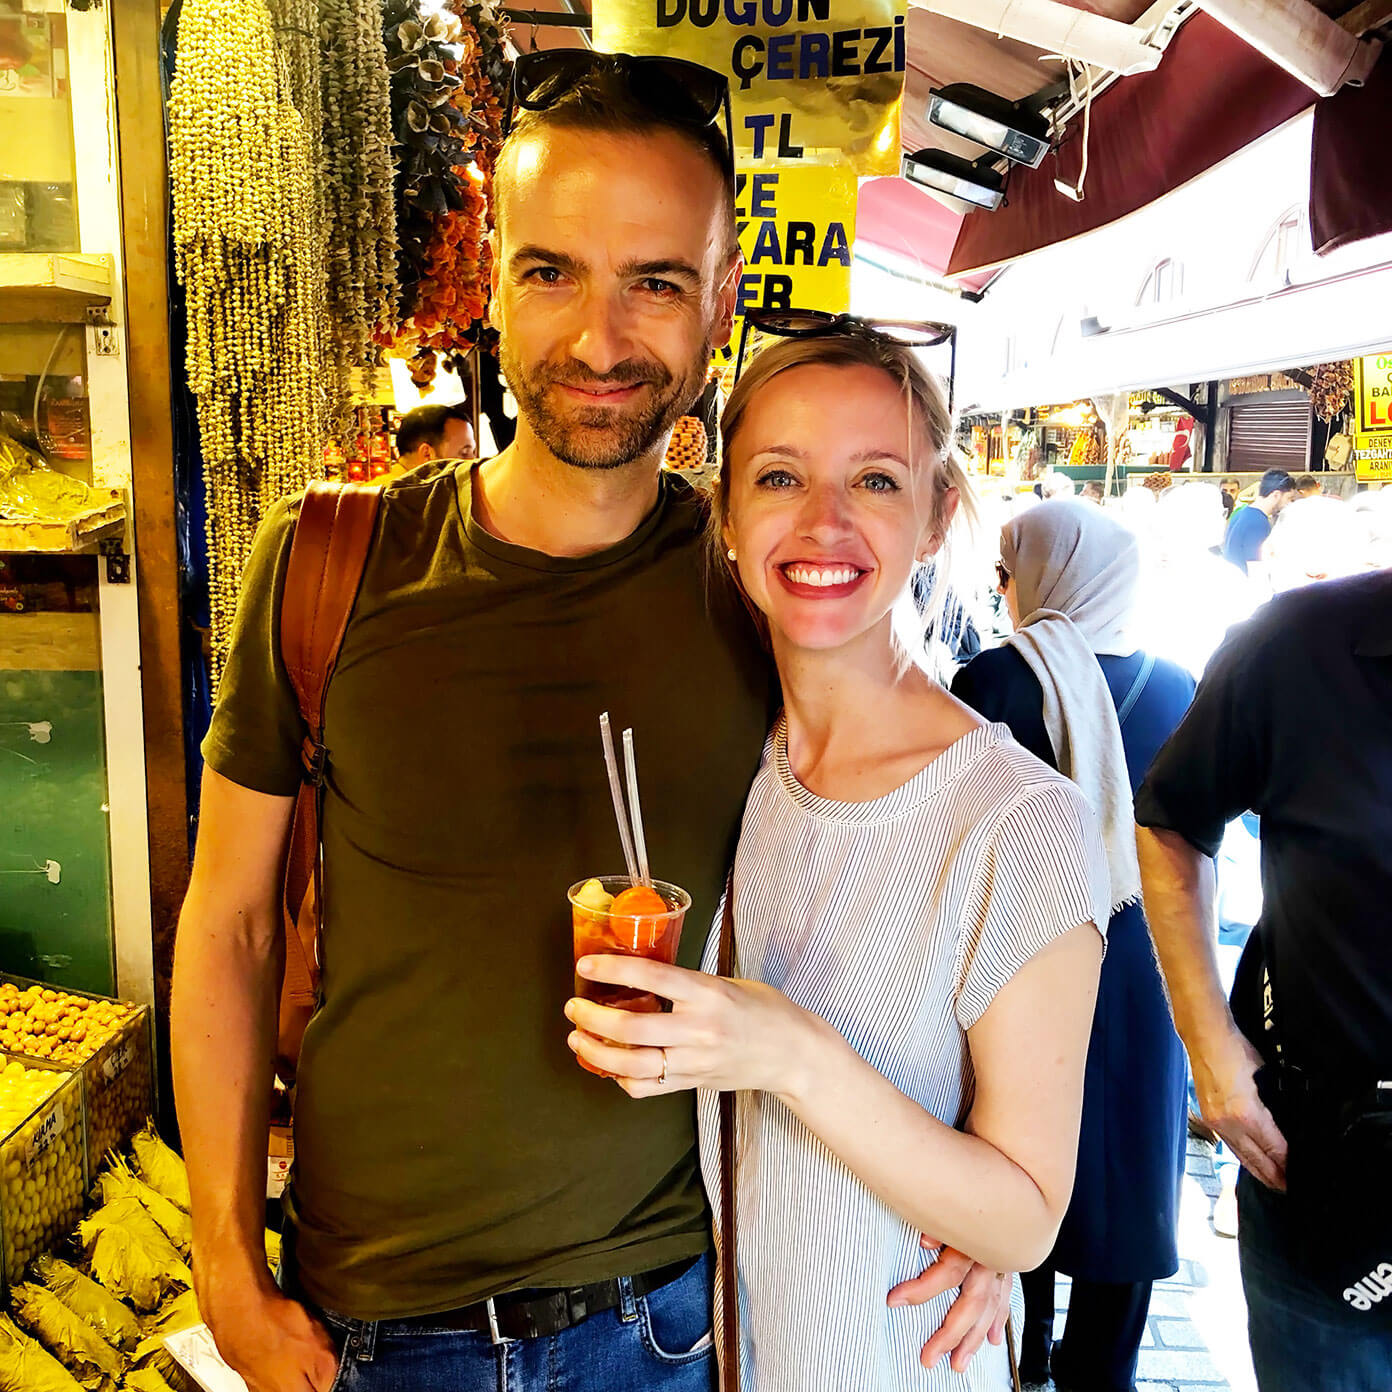 Pickle juice in Istanbul spice market food tour